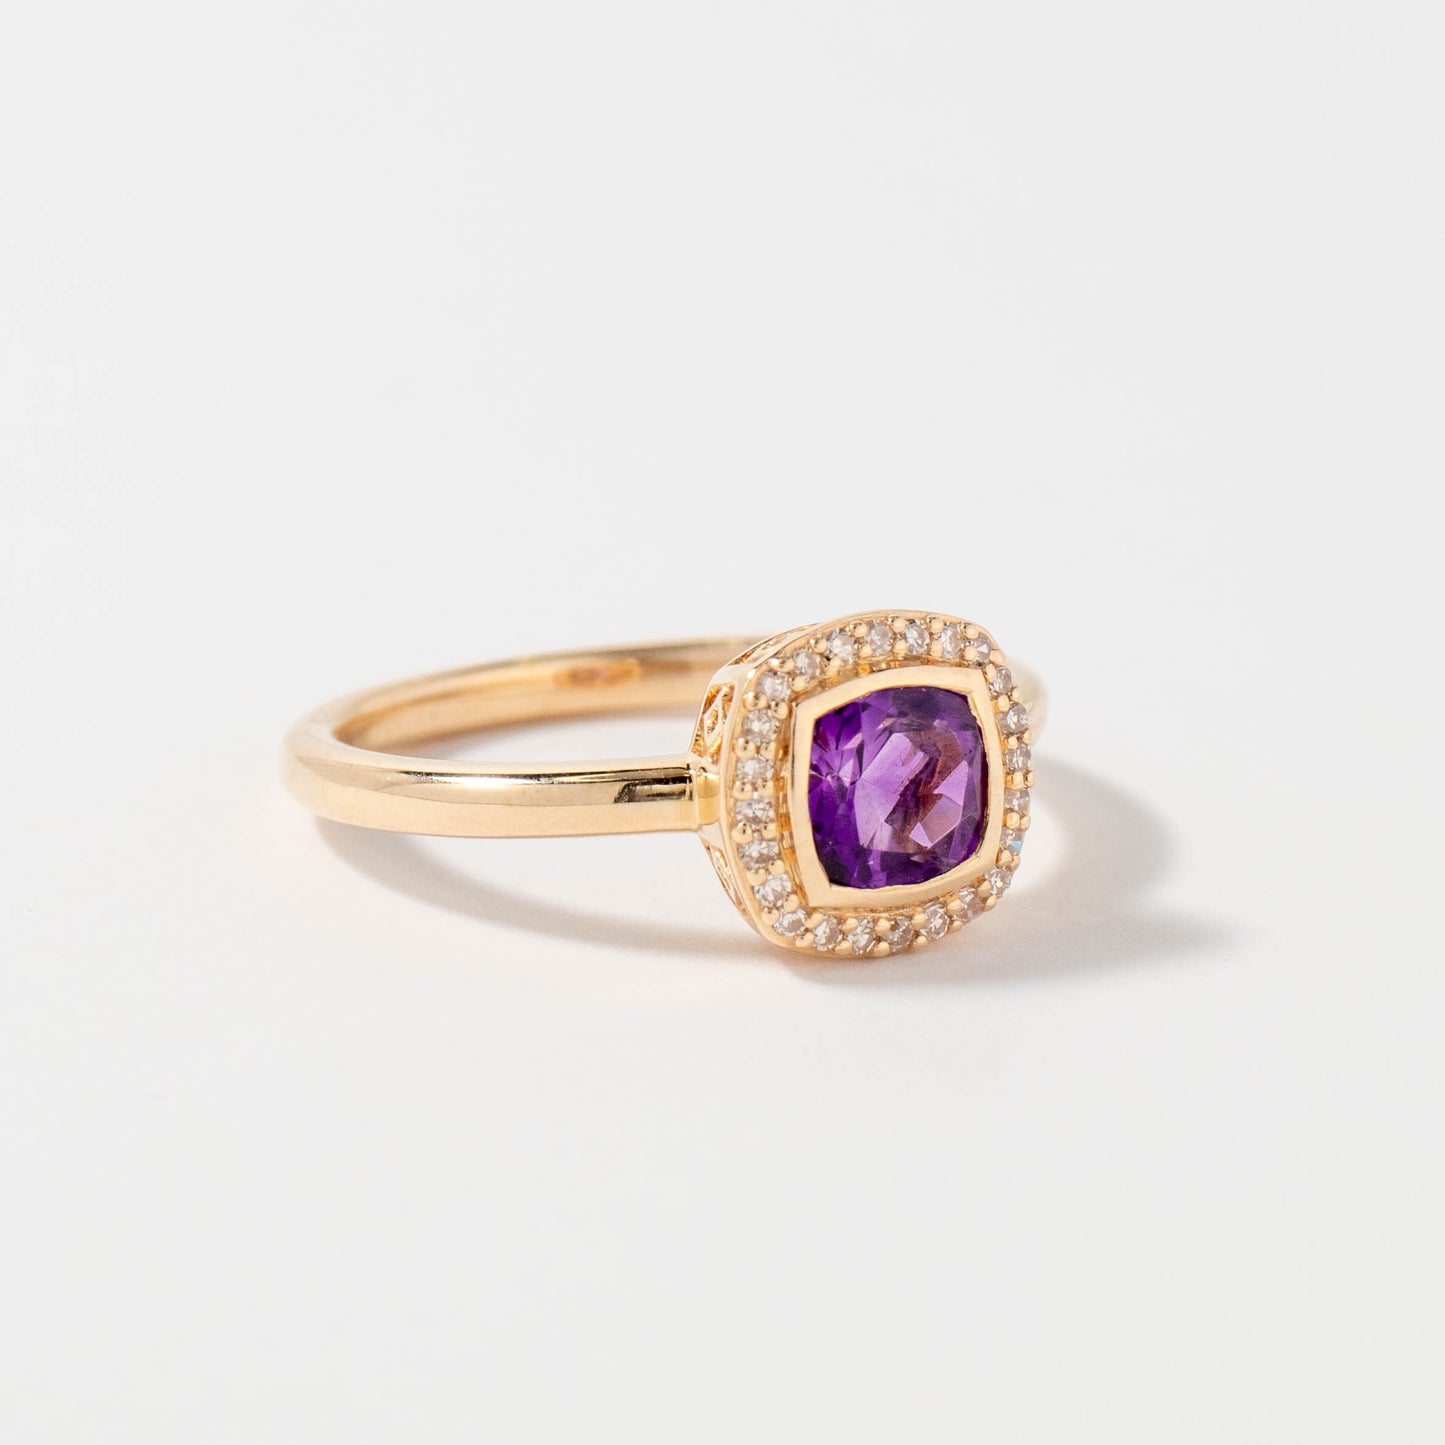 Cushion Cut Amethyst Ring with Diamond Accents in 10K Yellow Gold